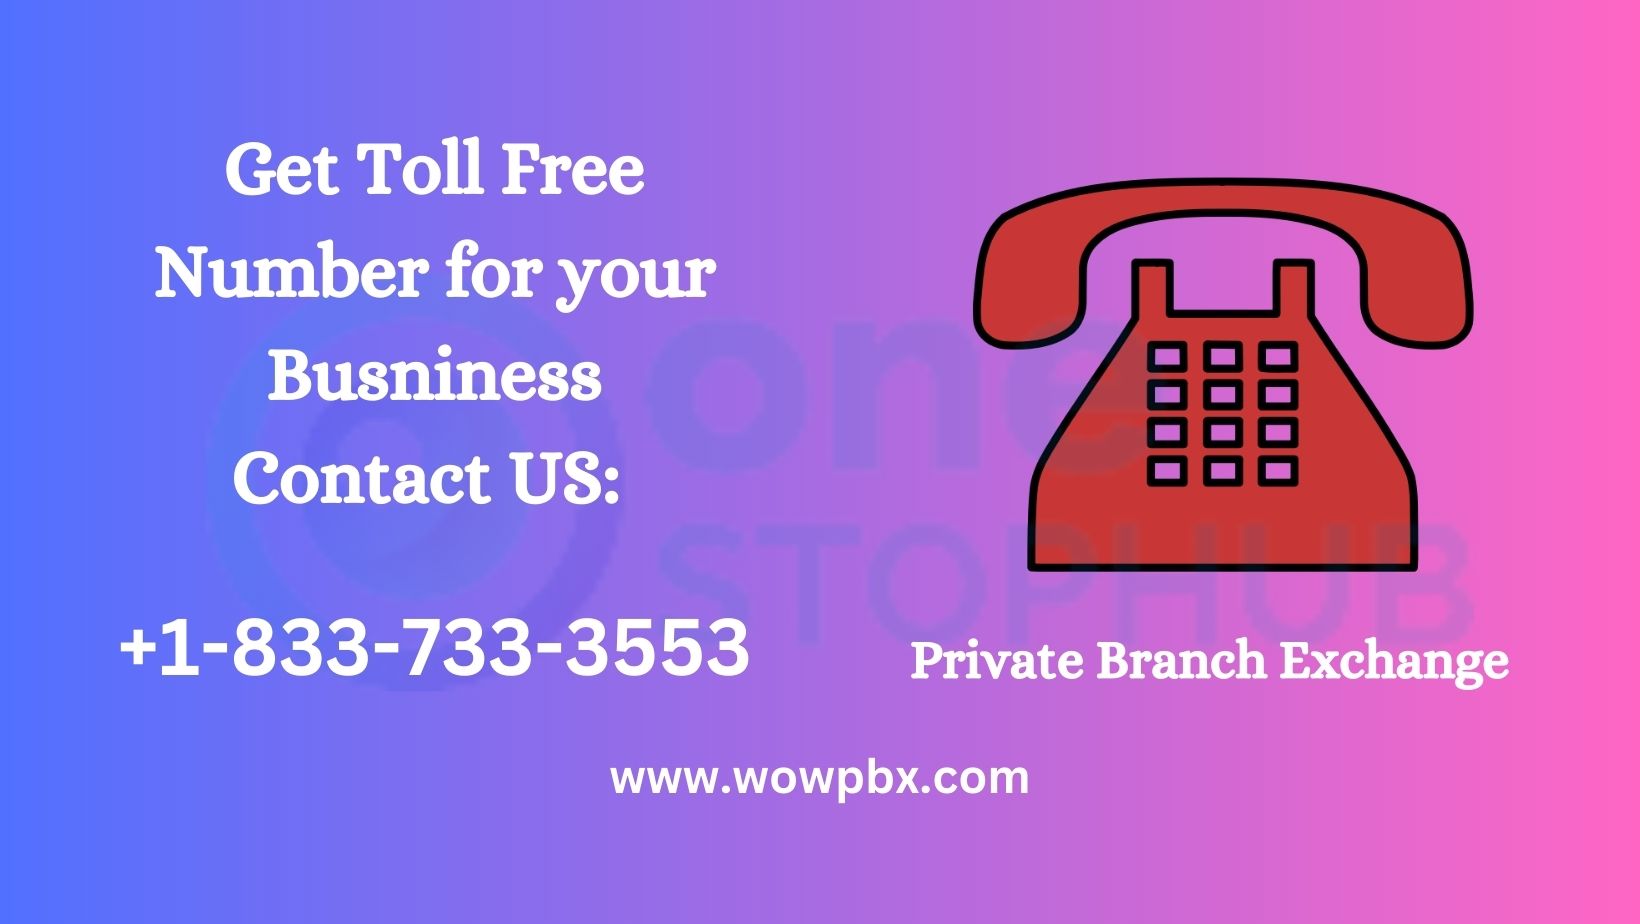 Get Toll Free Number For Business